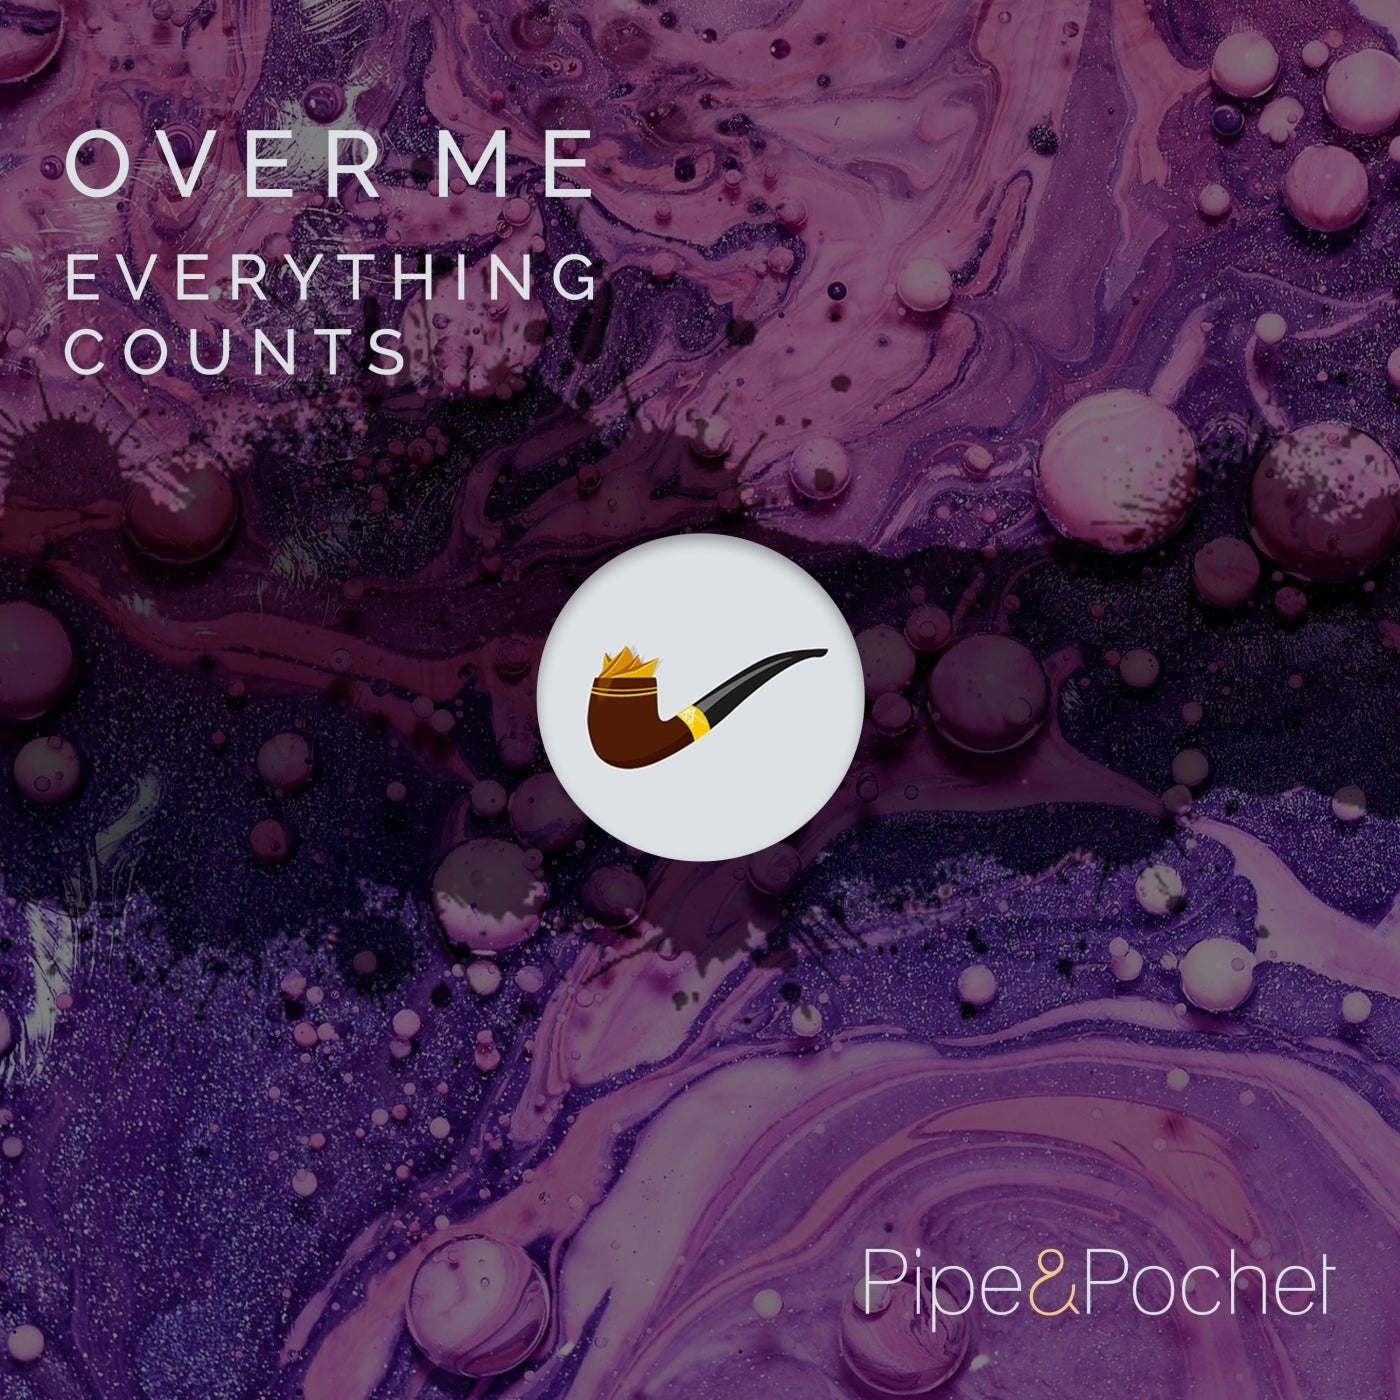 Everything Counts – Over Me [PAP054]